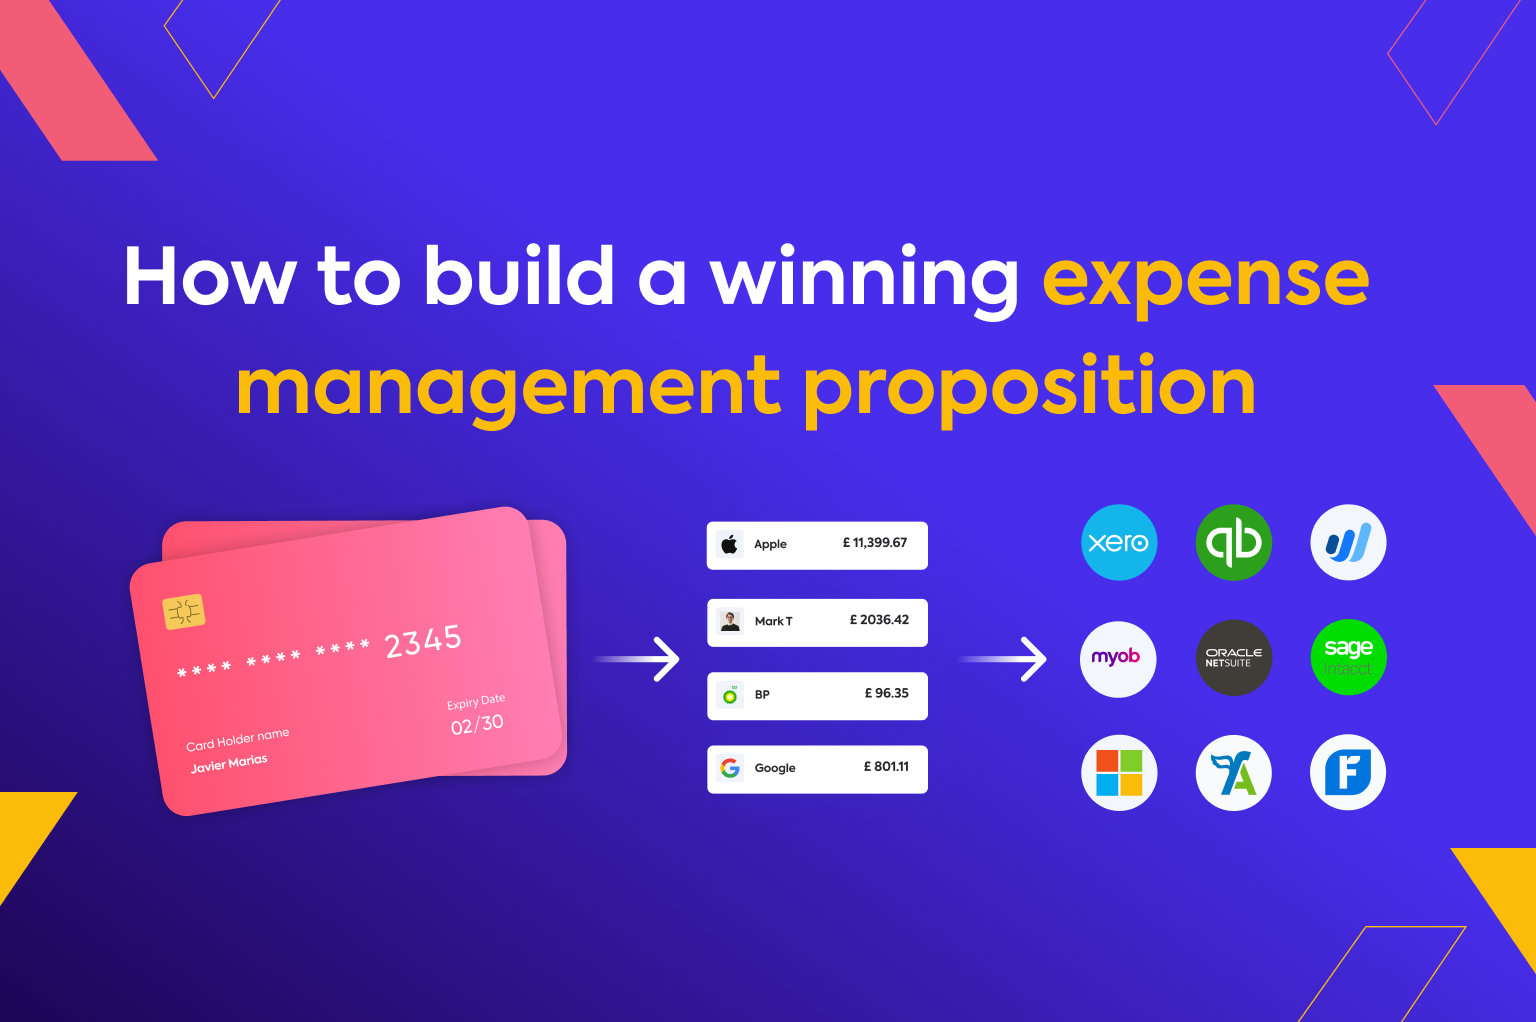 How to build a winning expense management proposition